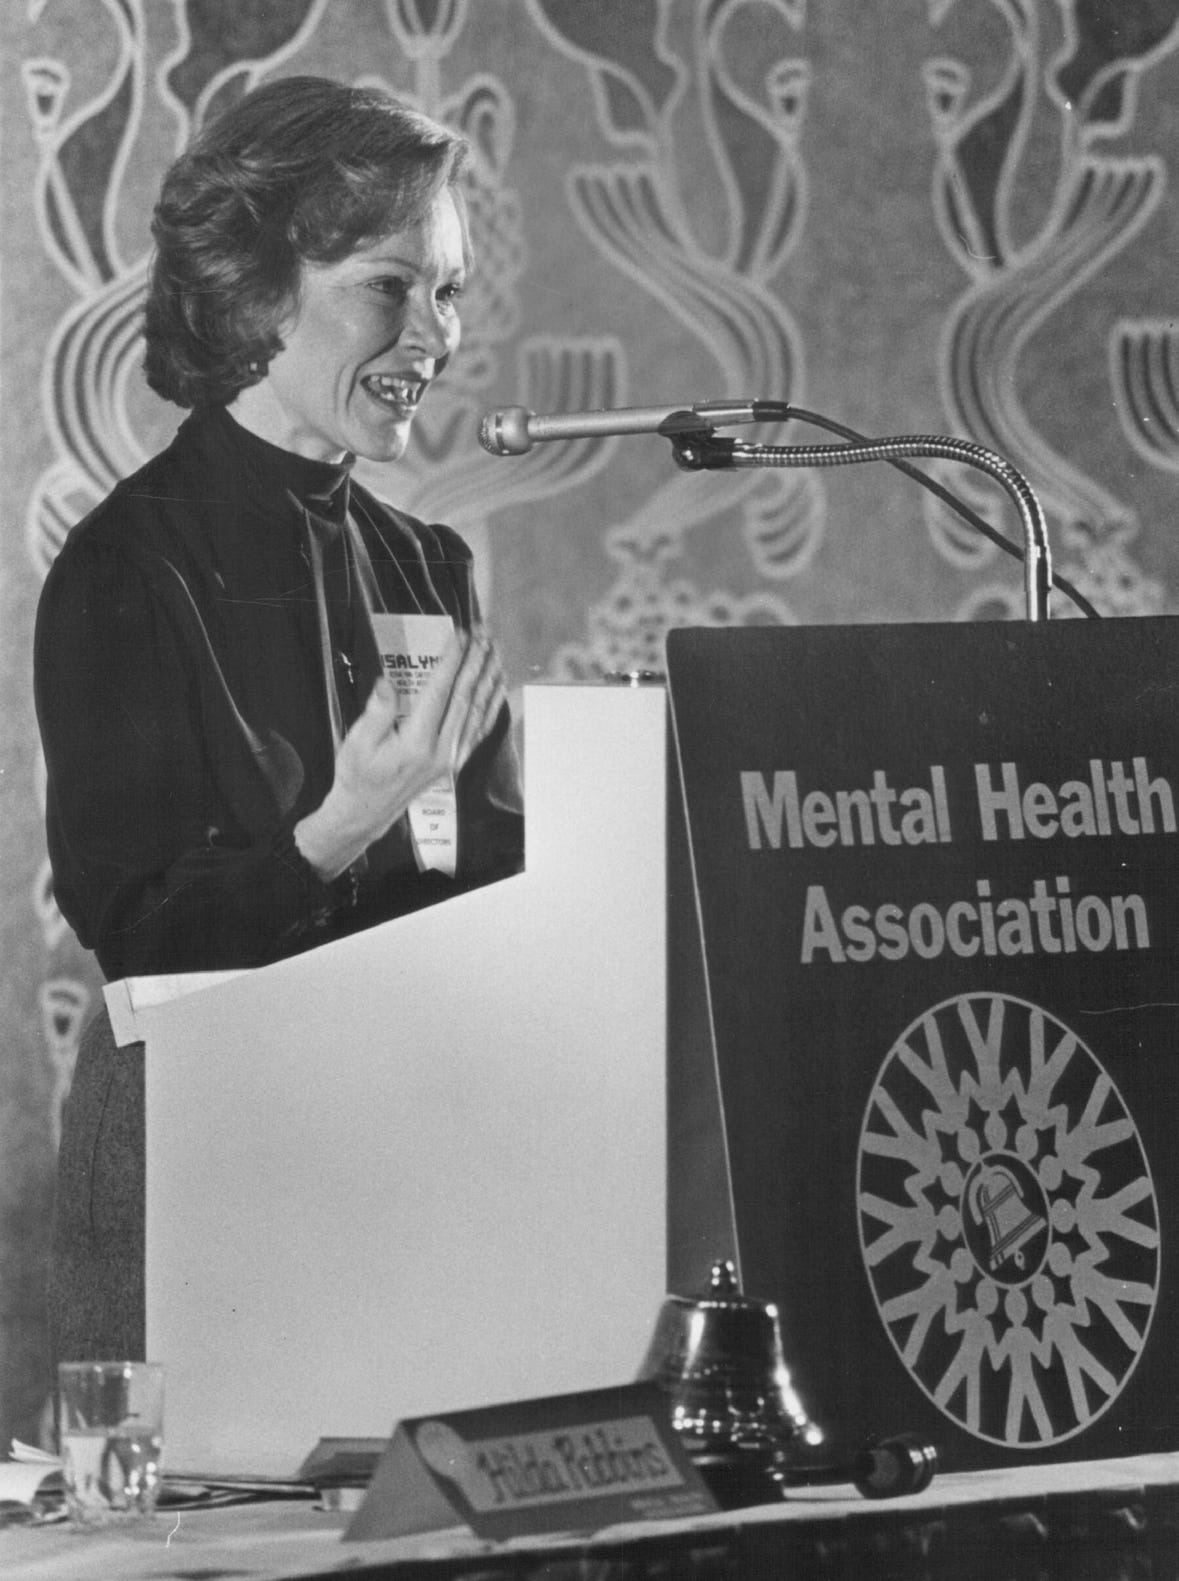 A black and white photo of Mrs. Rosalynn Carter speaking at a podium in front of a poster titled 'Mental Health Association'.